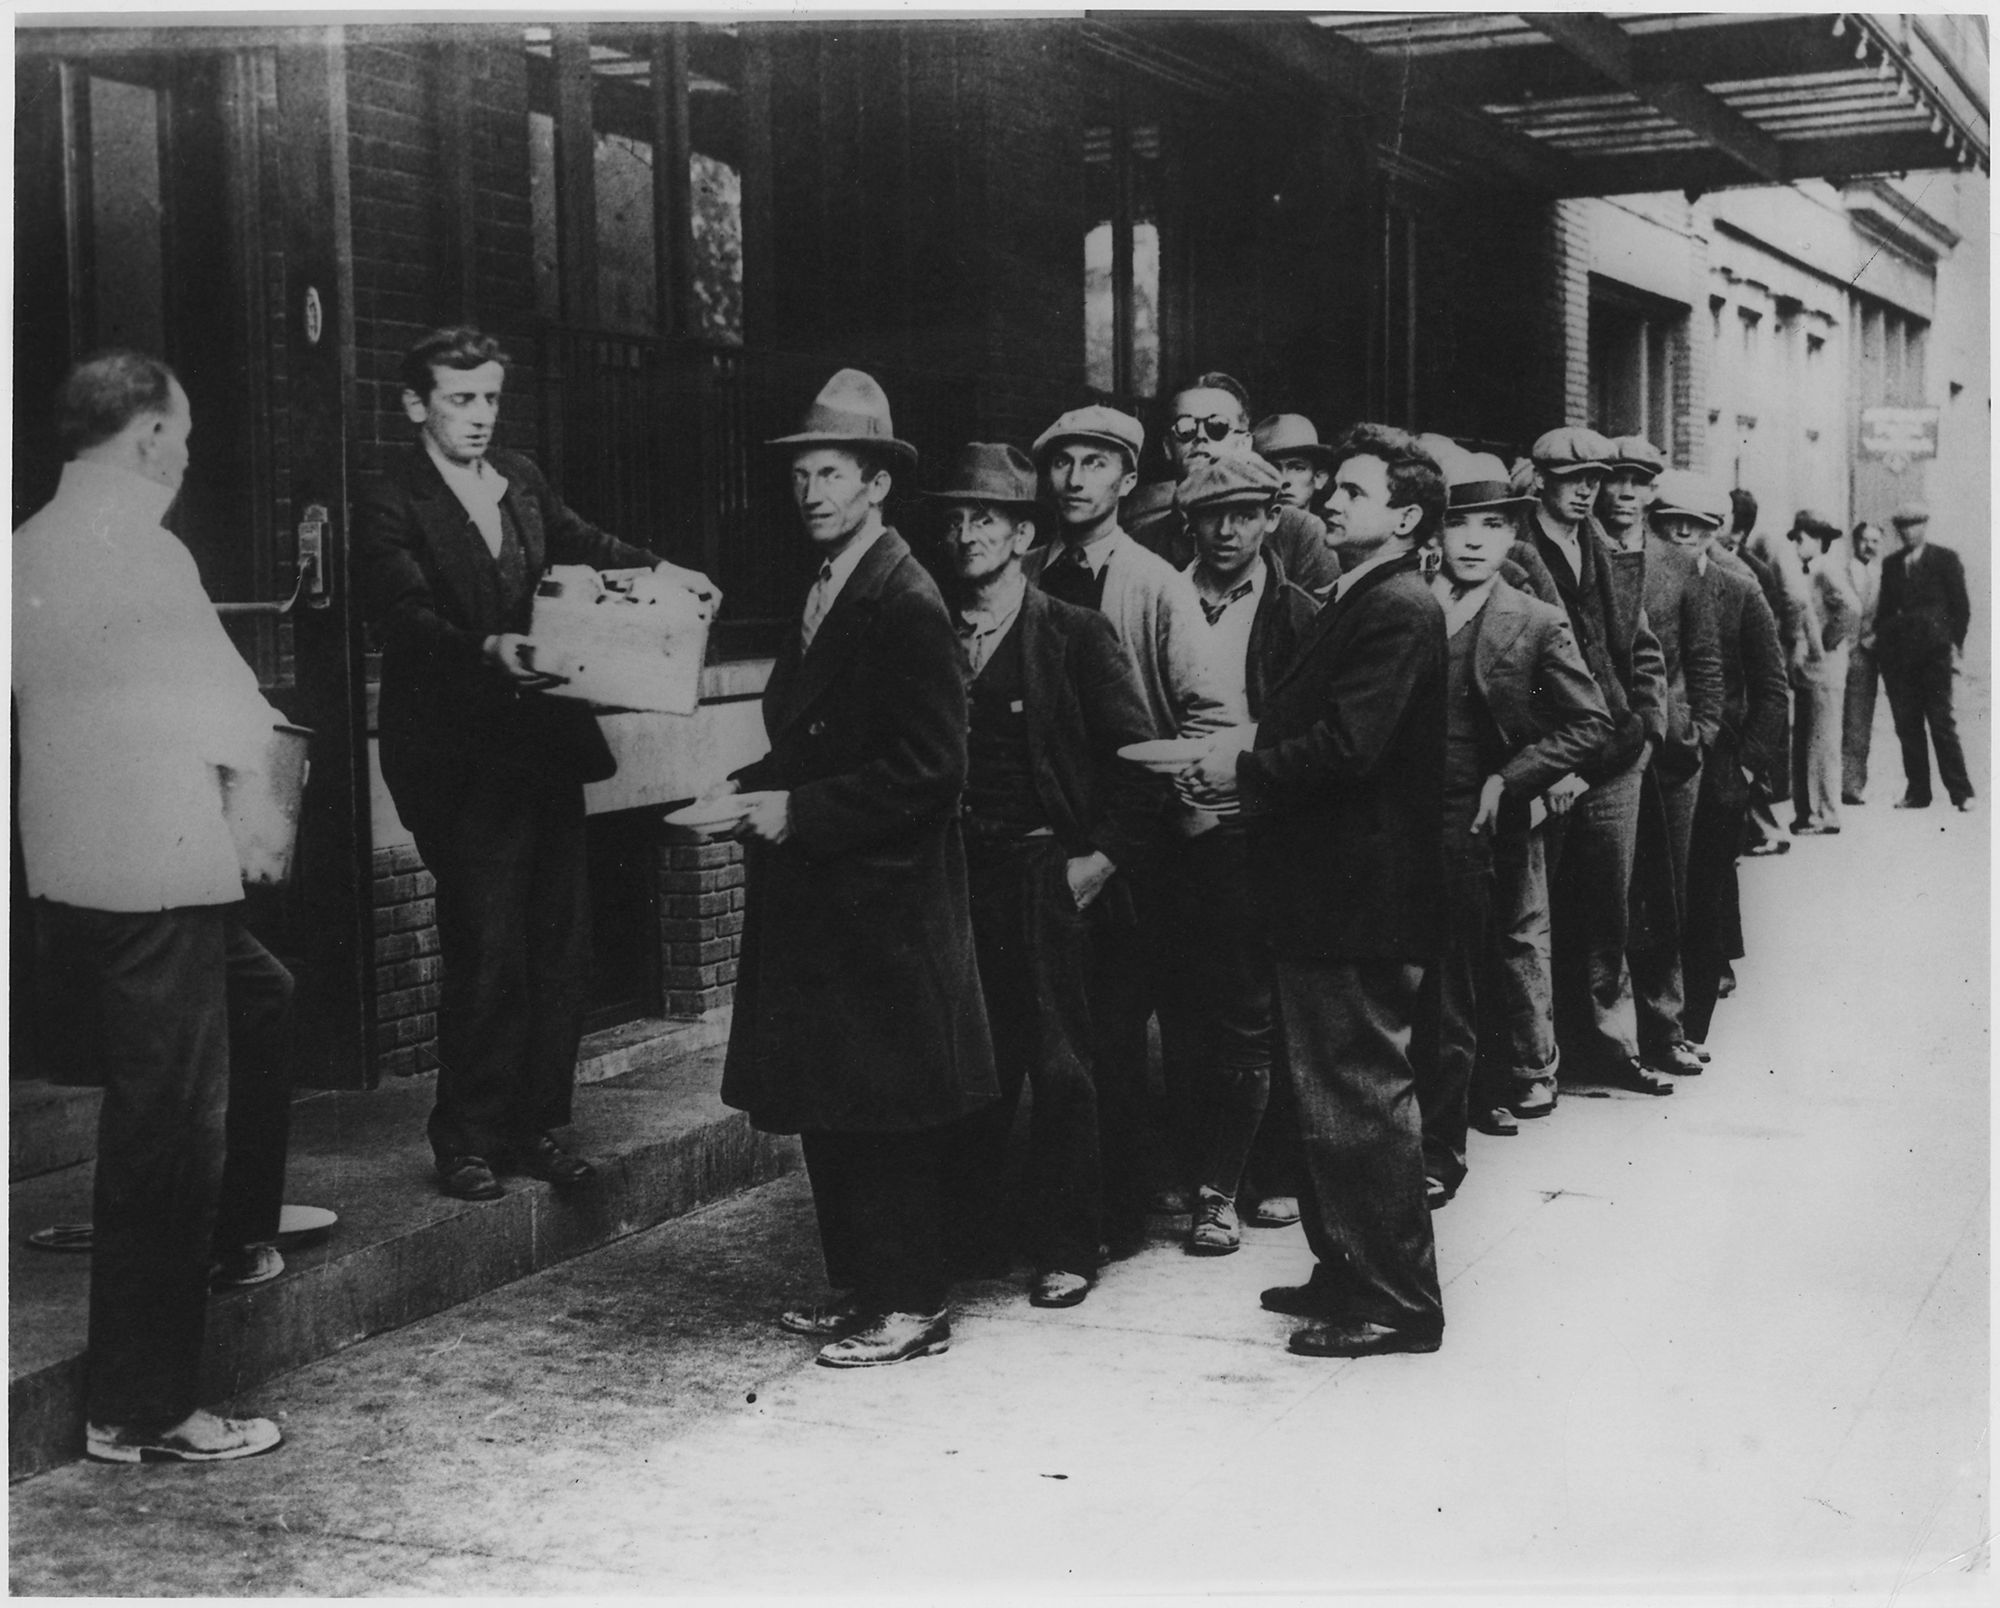 what were some of the social programs created under the new deal in the 1930s